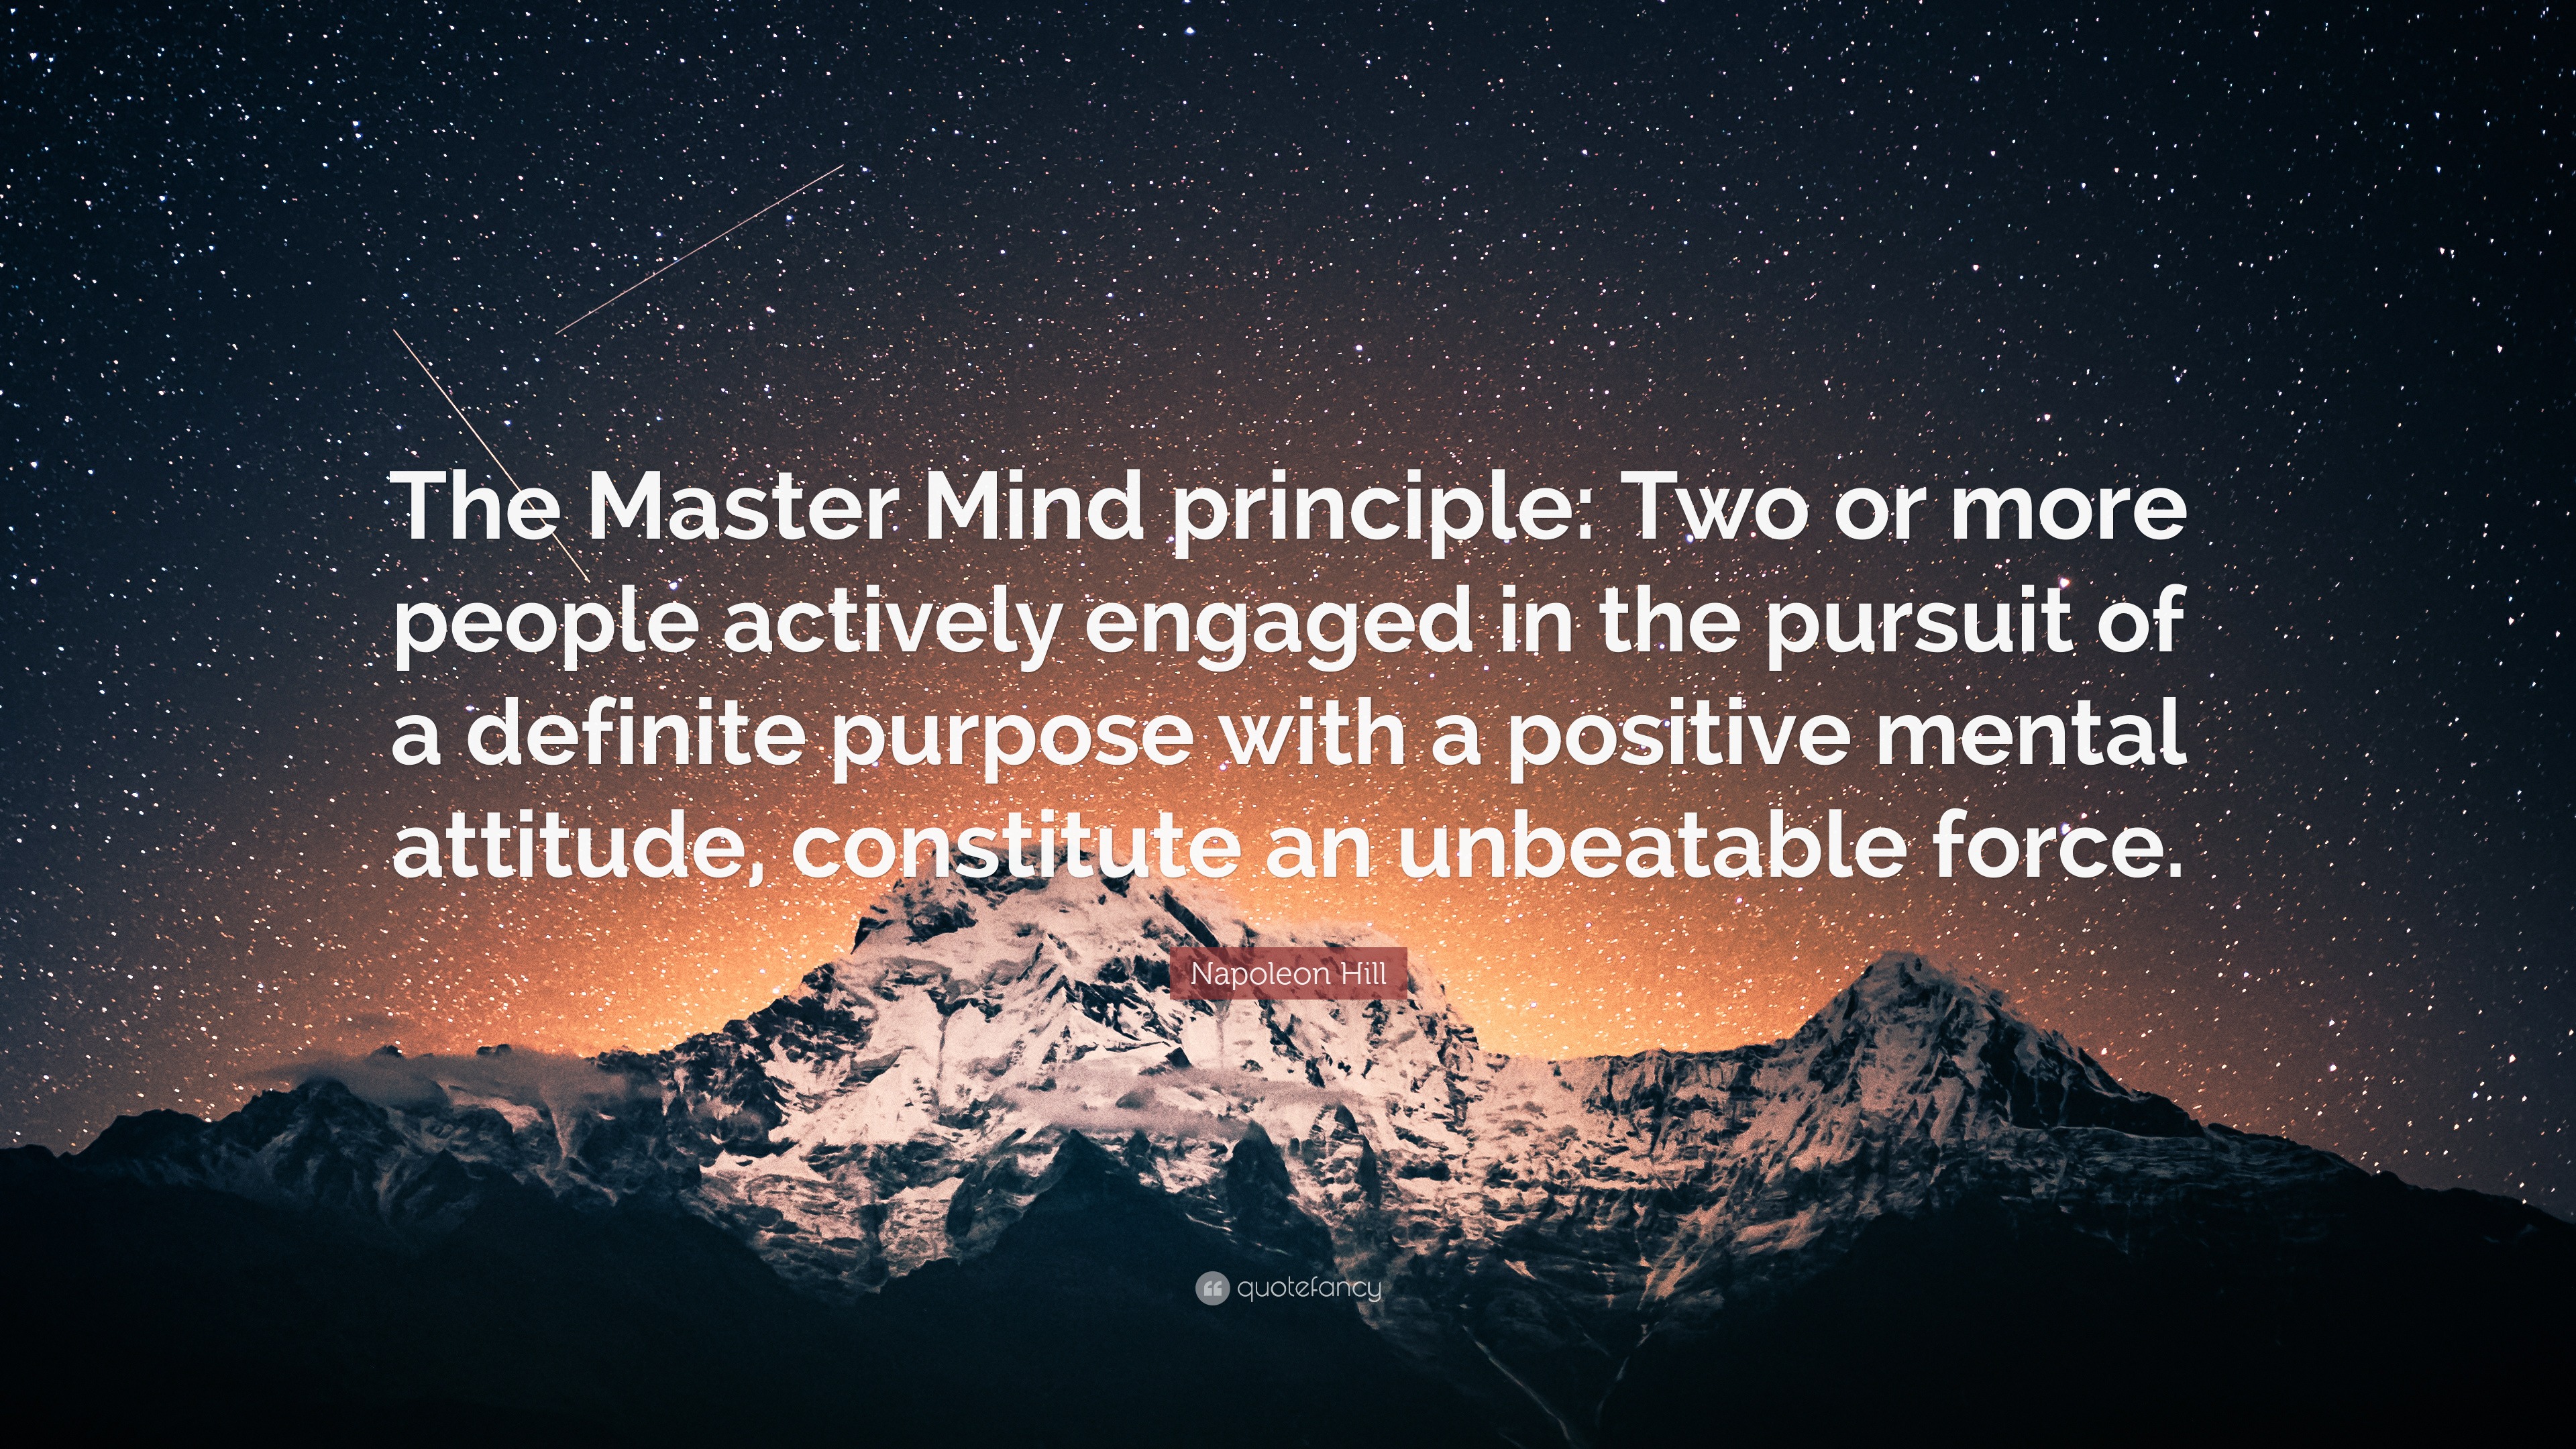 Napoleon Hill Quote: “The Master Mind principle: Two or more people  actively engaged in the pursuit of a definite purpose with a positive  ment”